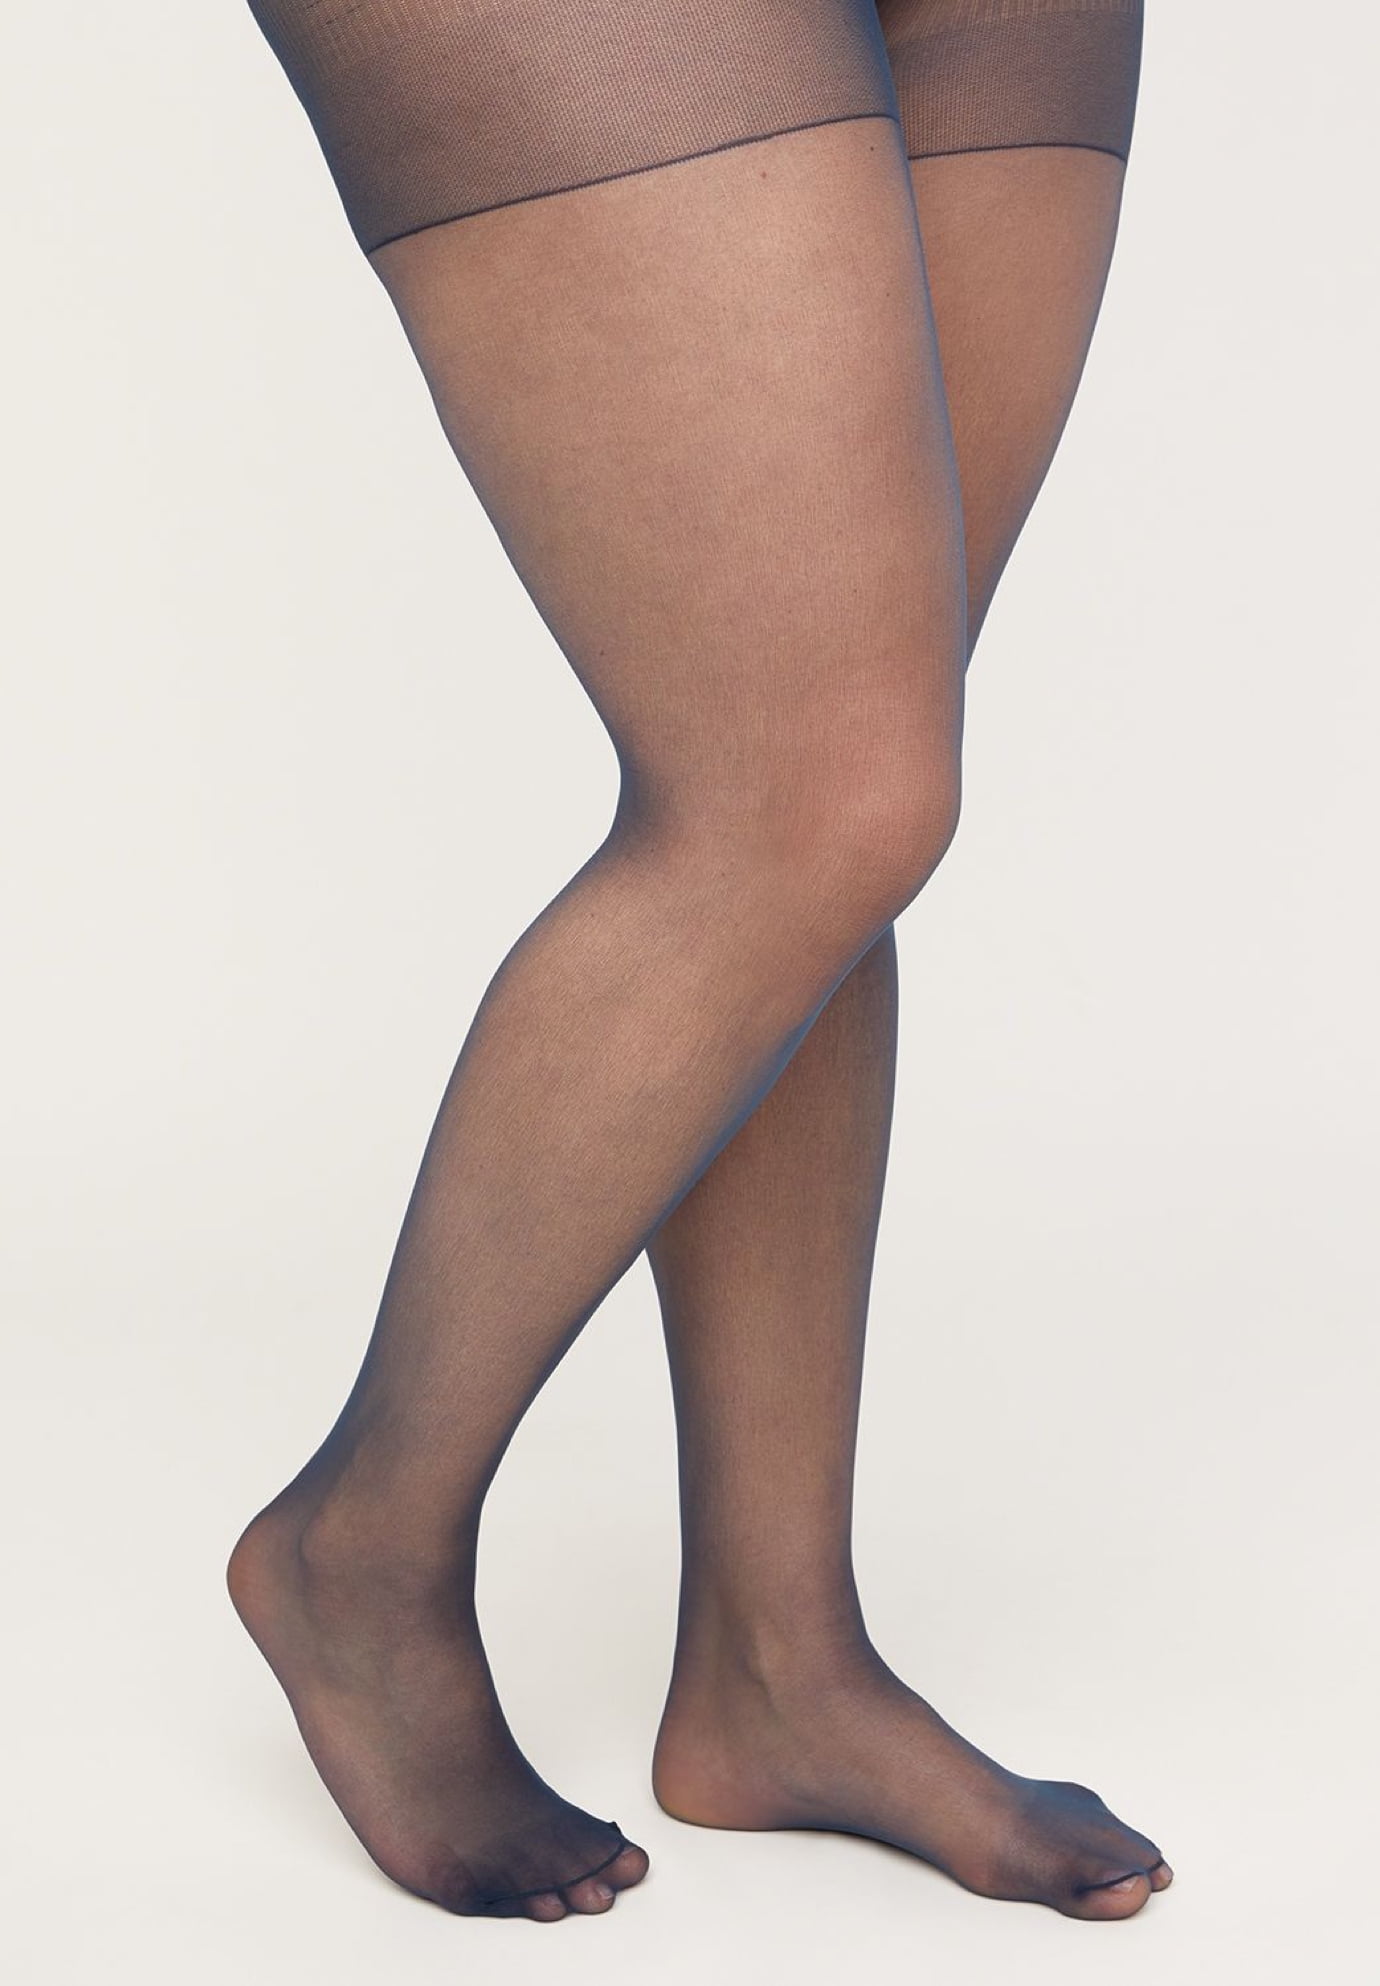 Plus Size Pantyhose Legs And Feet